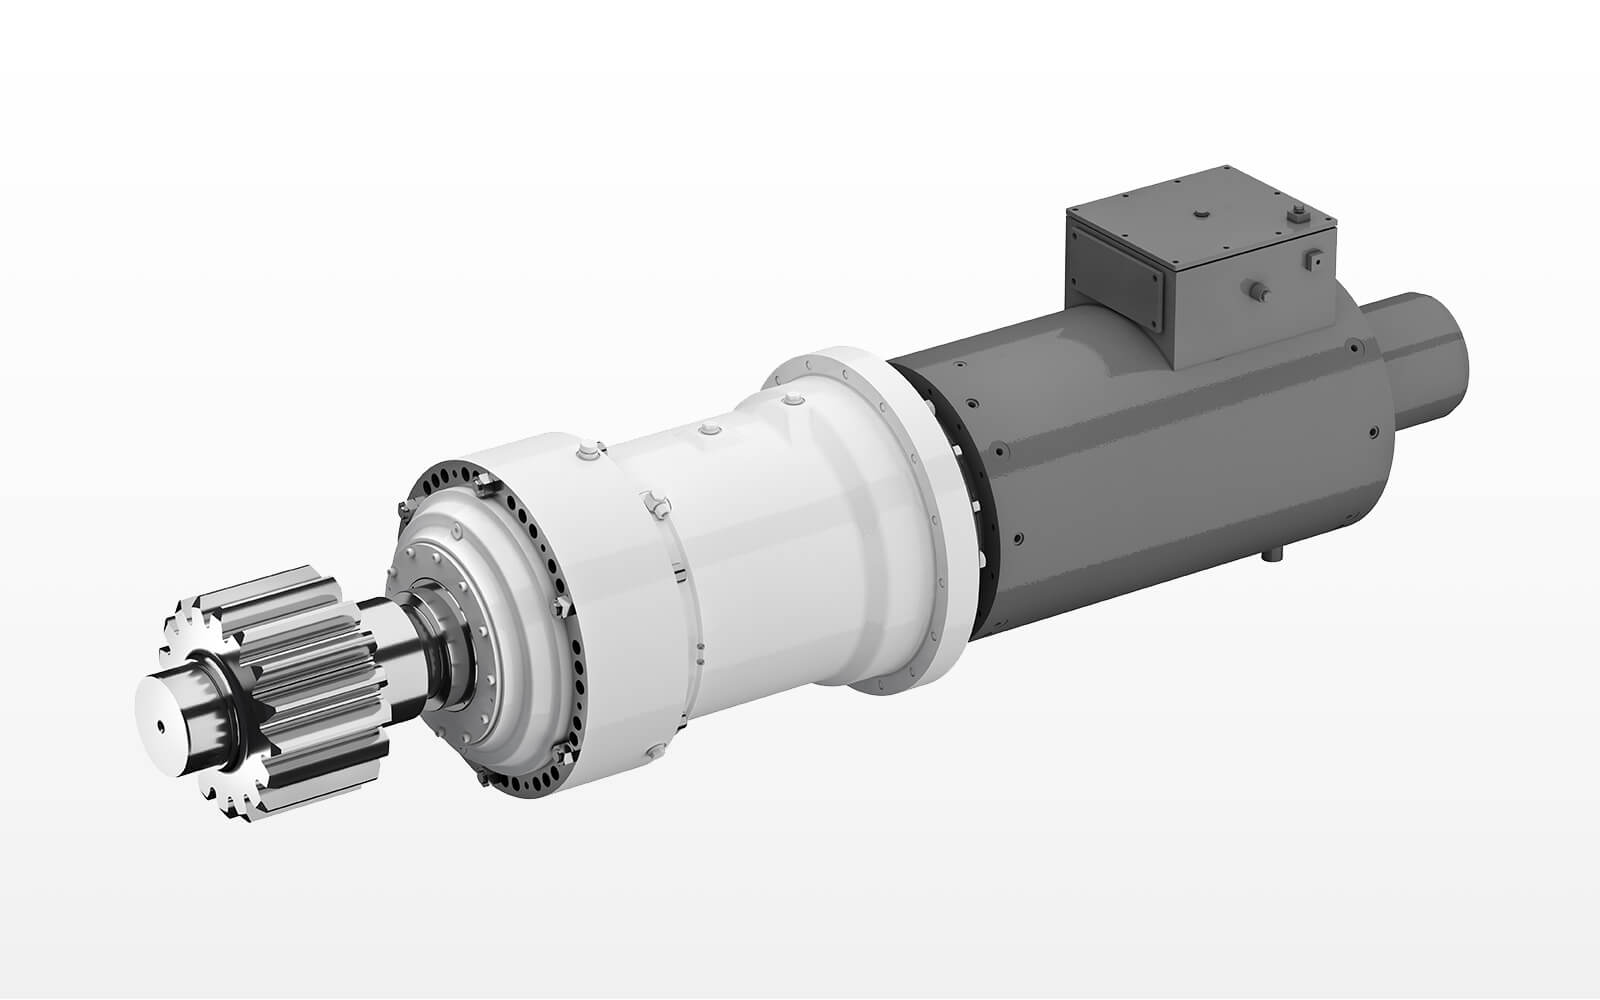 Main gearbox with asynchronous-motor in the power range of 200 till 400 kW